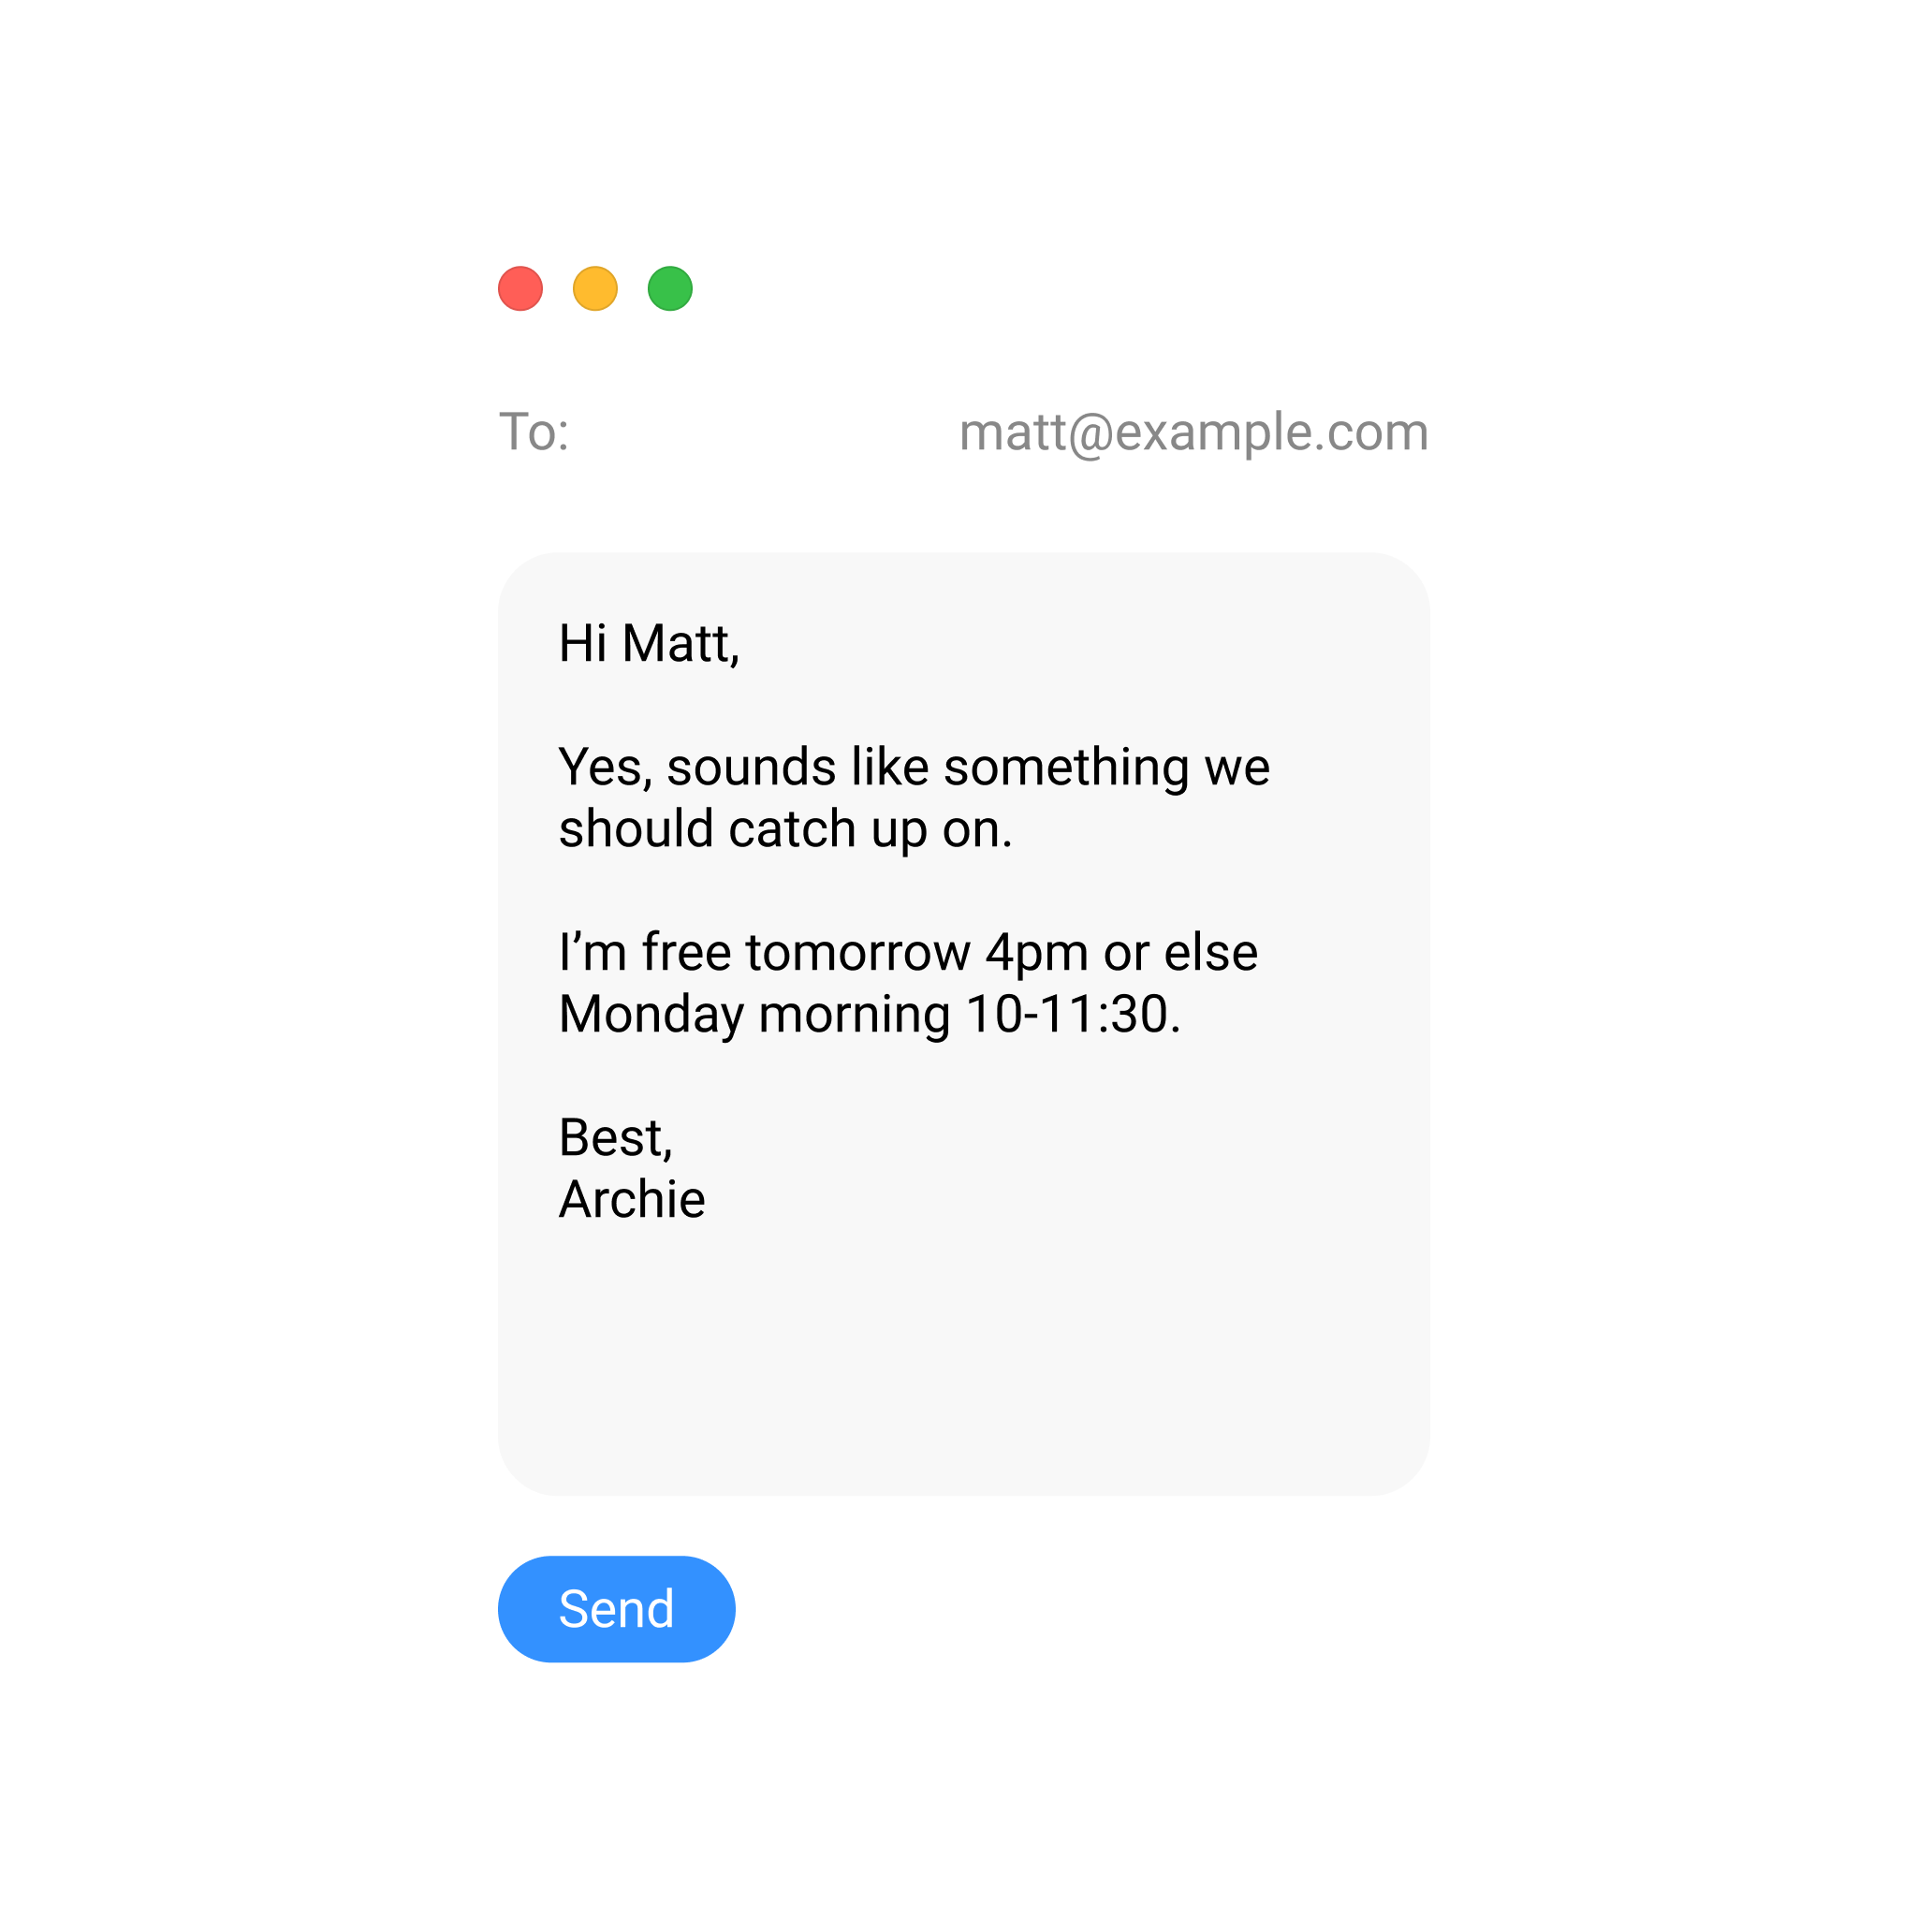 An image of an automated draft reply to an email. The AI draft reply reads: 'Hi Matt,

Yes, sounds like something we should catch up on.

I’m free tomorrow 4pm or else Monday morning 10-11:30.

Best,
Archie'.